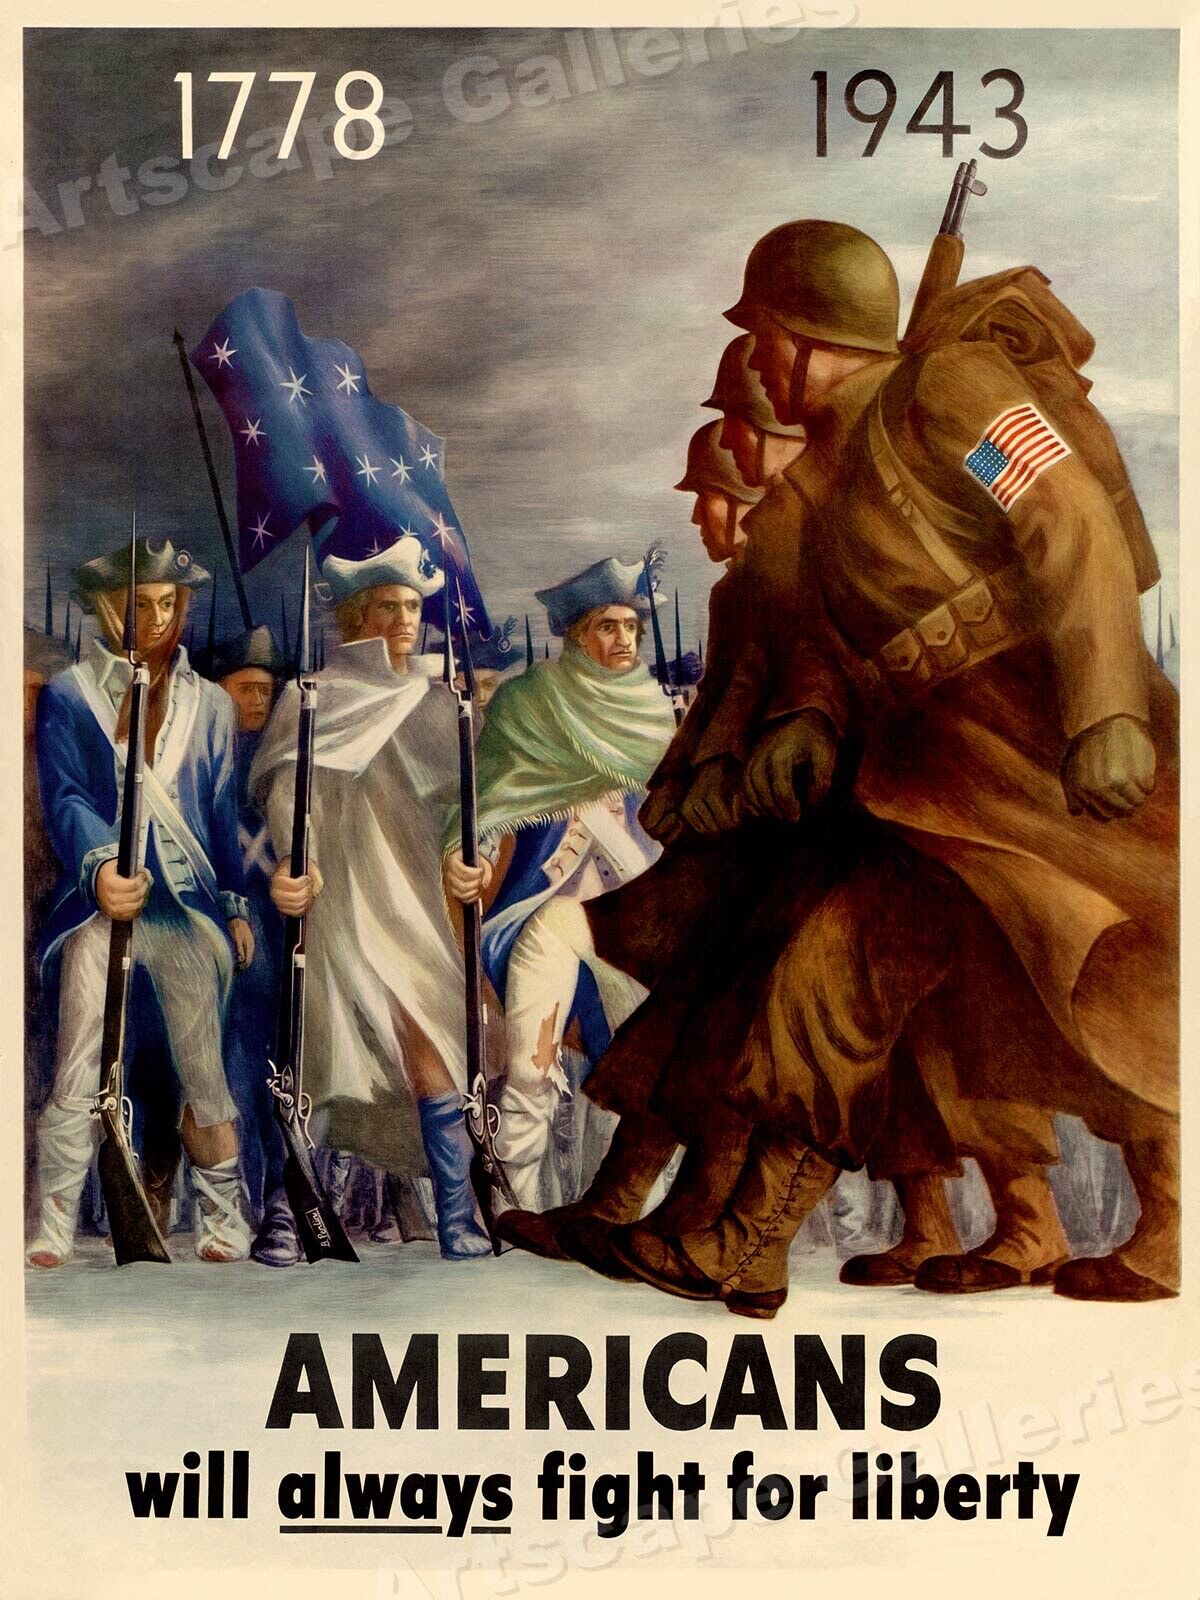 1778 - 1943 Americans Always Fight For Liberty WW2 Army Poster - 24x32